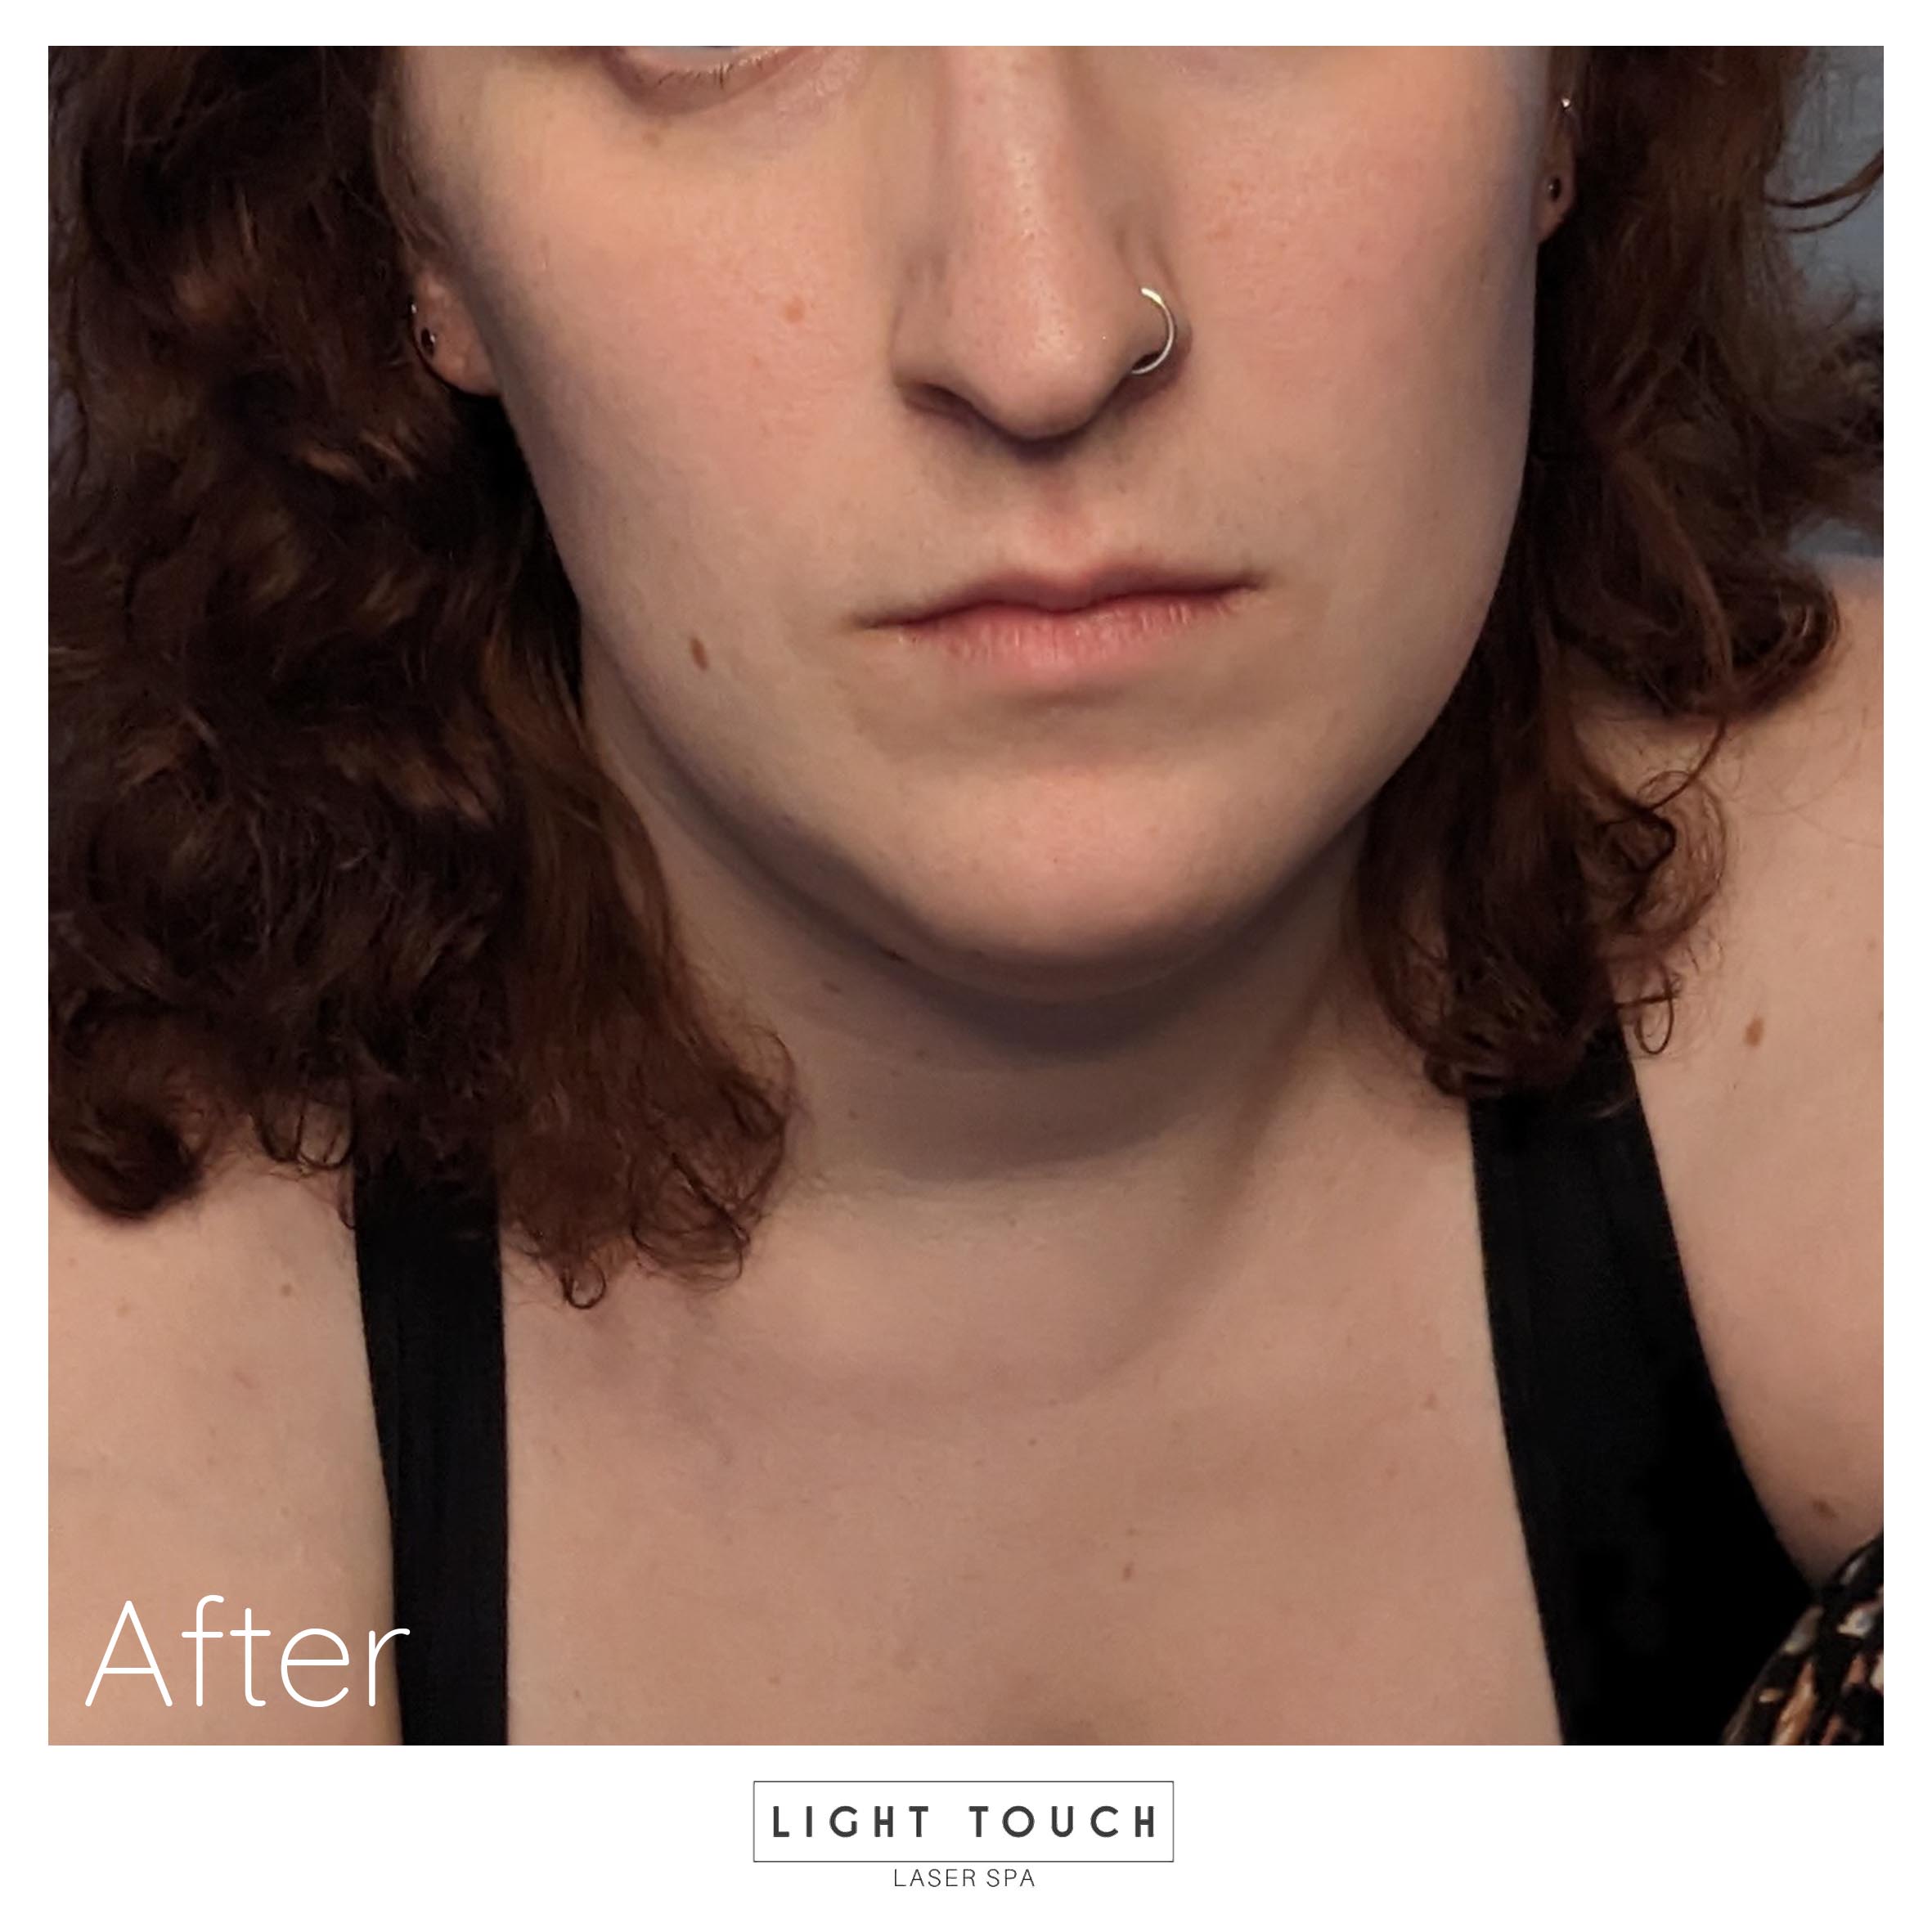 Laser hair removal treatment for transgender people in the facial area - results after